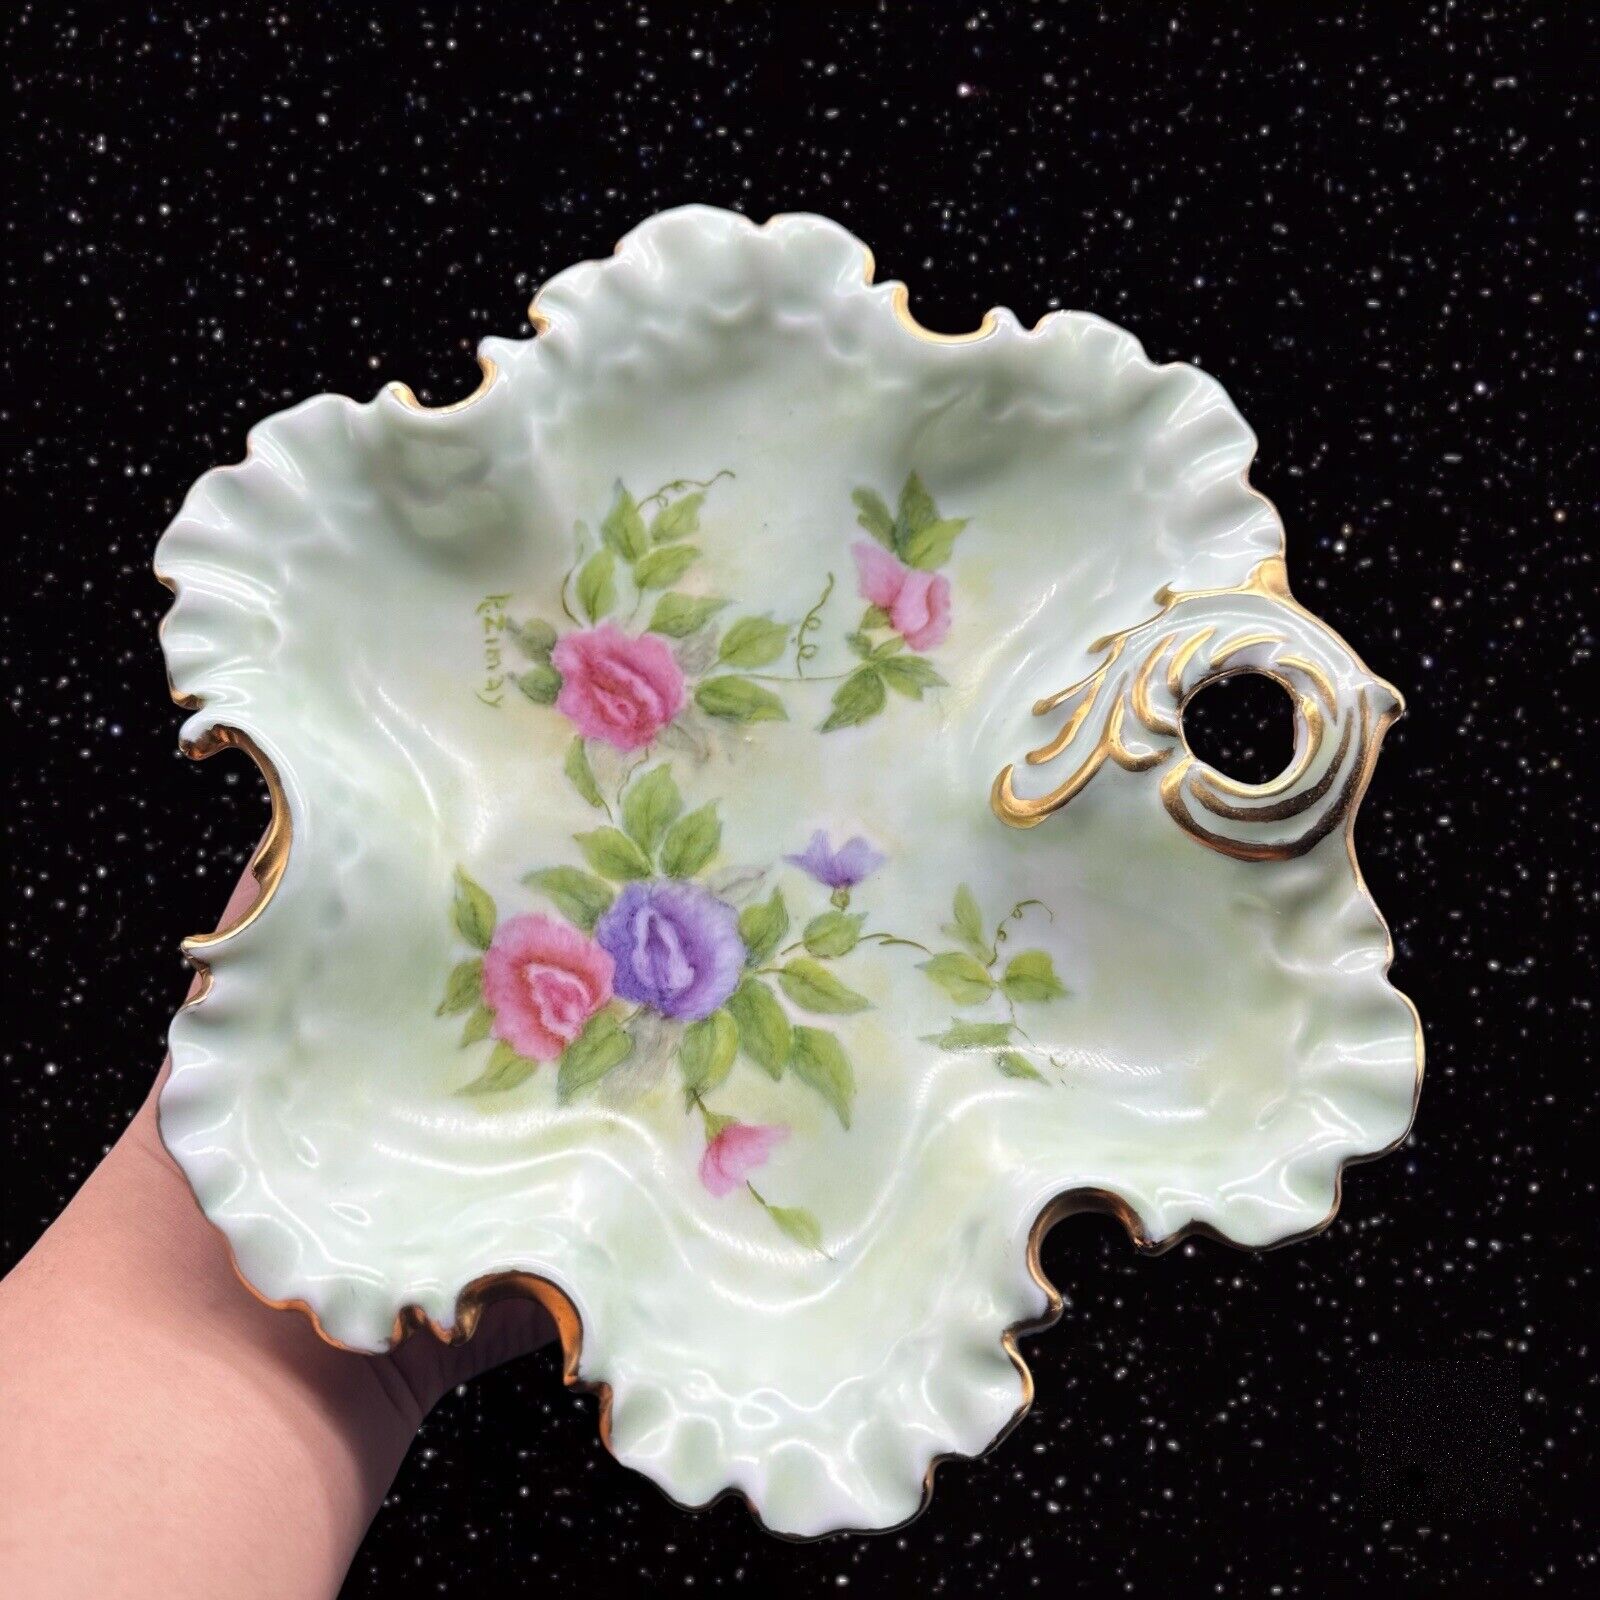 Antique Hand Painted Dish Signed By Artist Flowers With Gold Edges 8.25”W 1.25”T